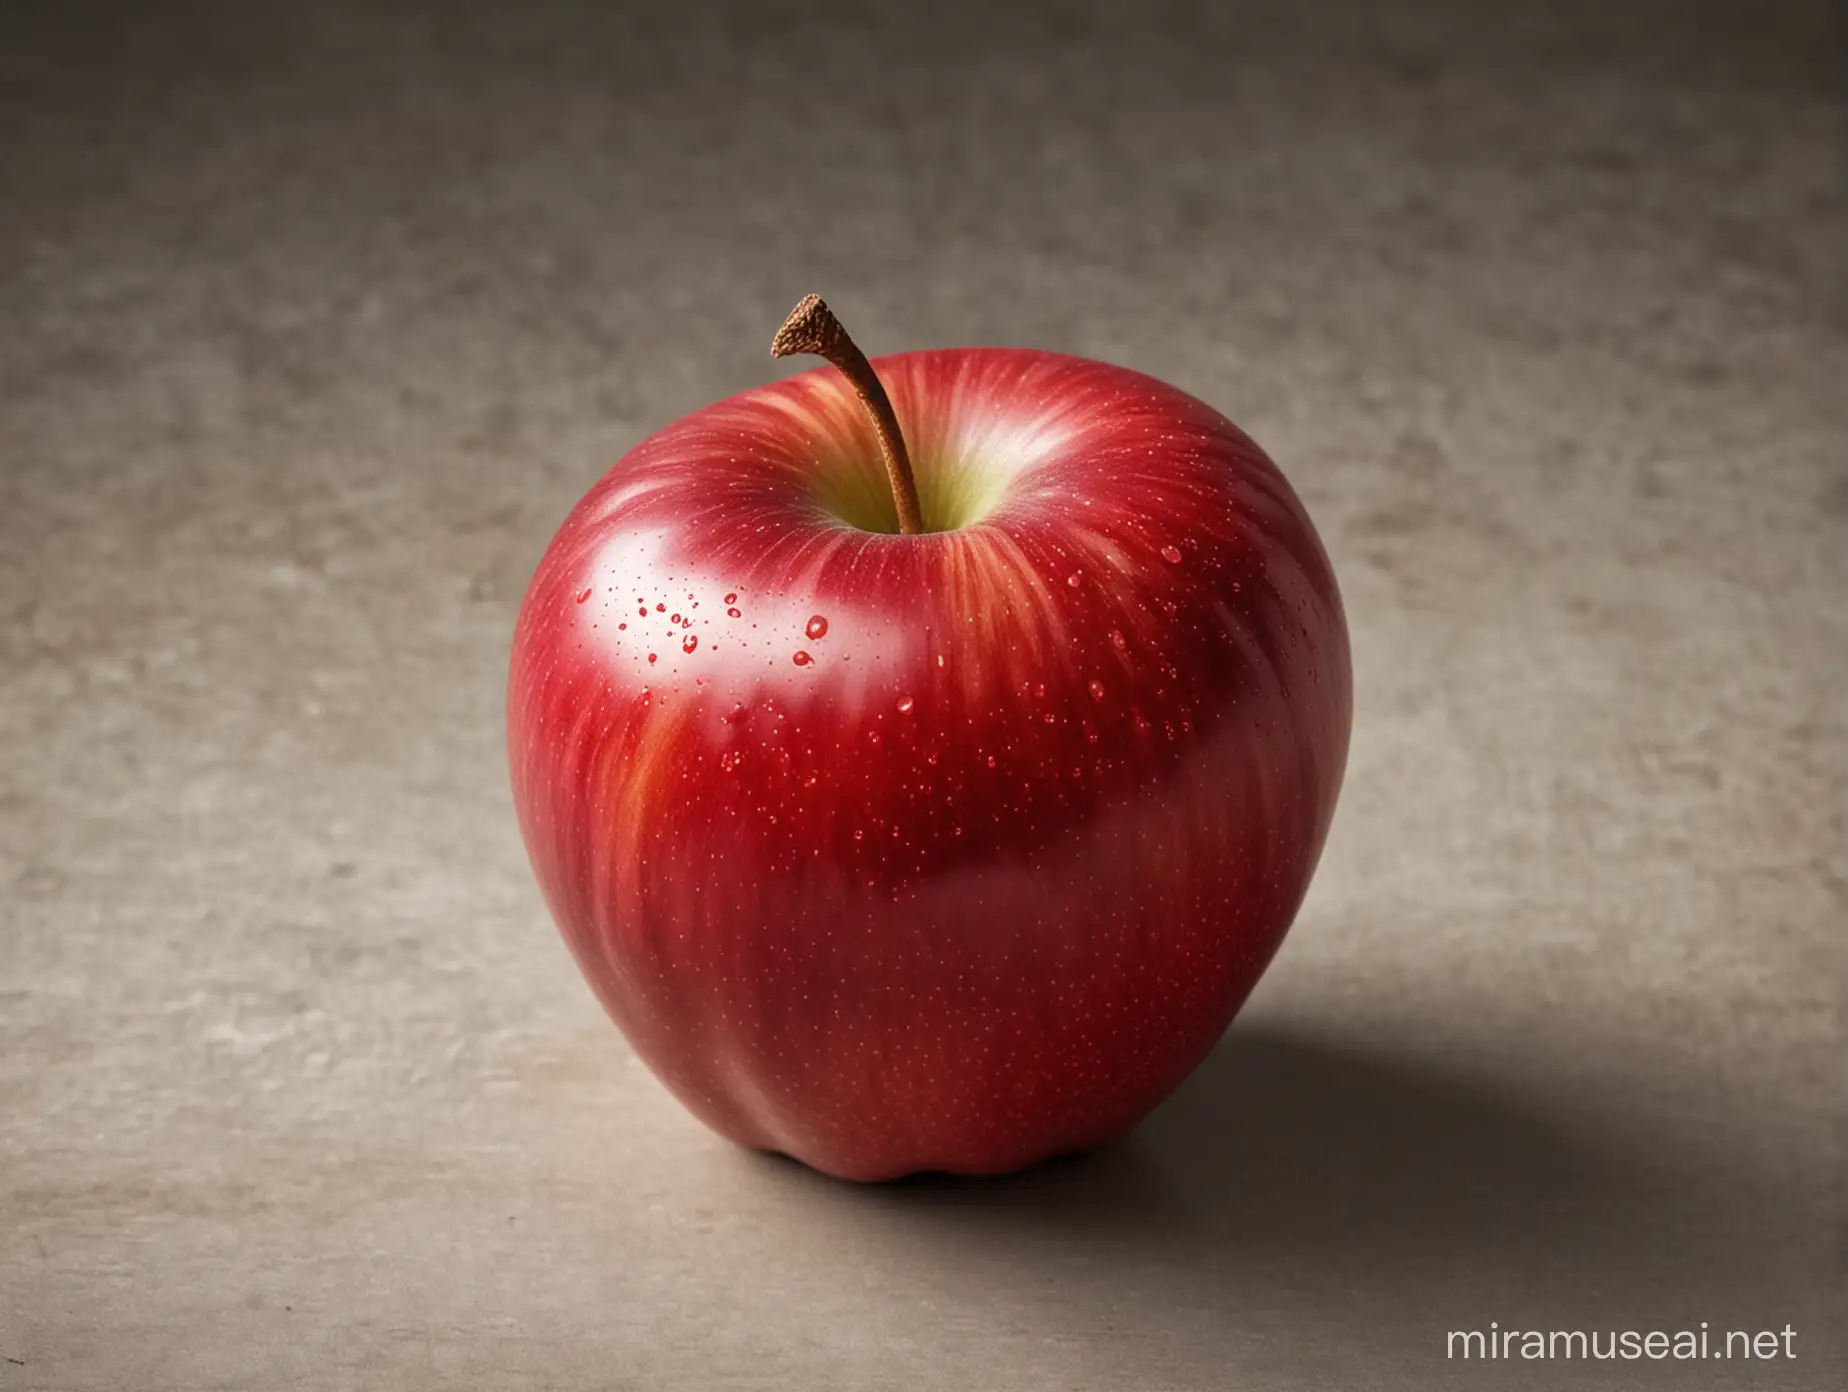 Bright Red Apple on Wooden Table